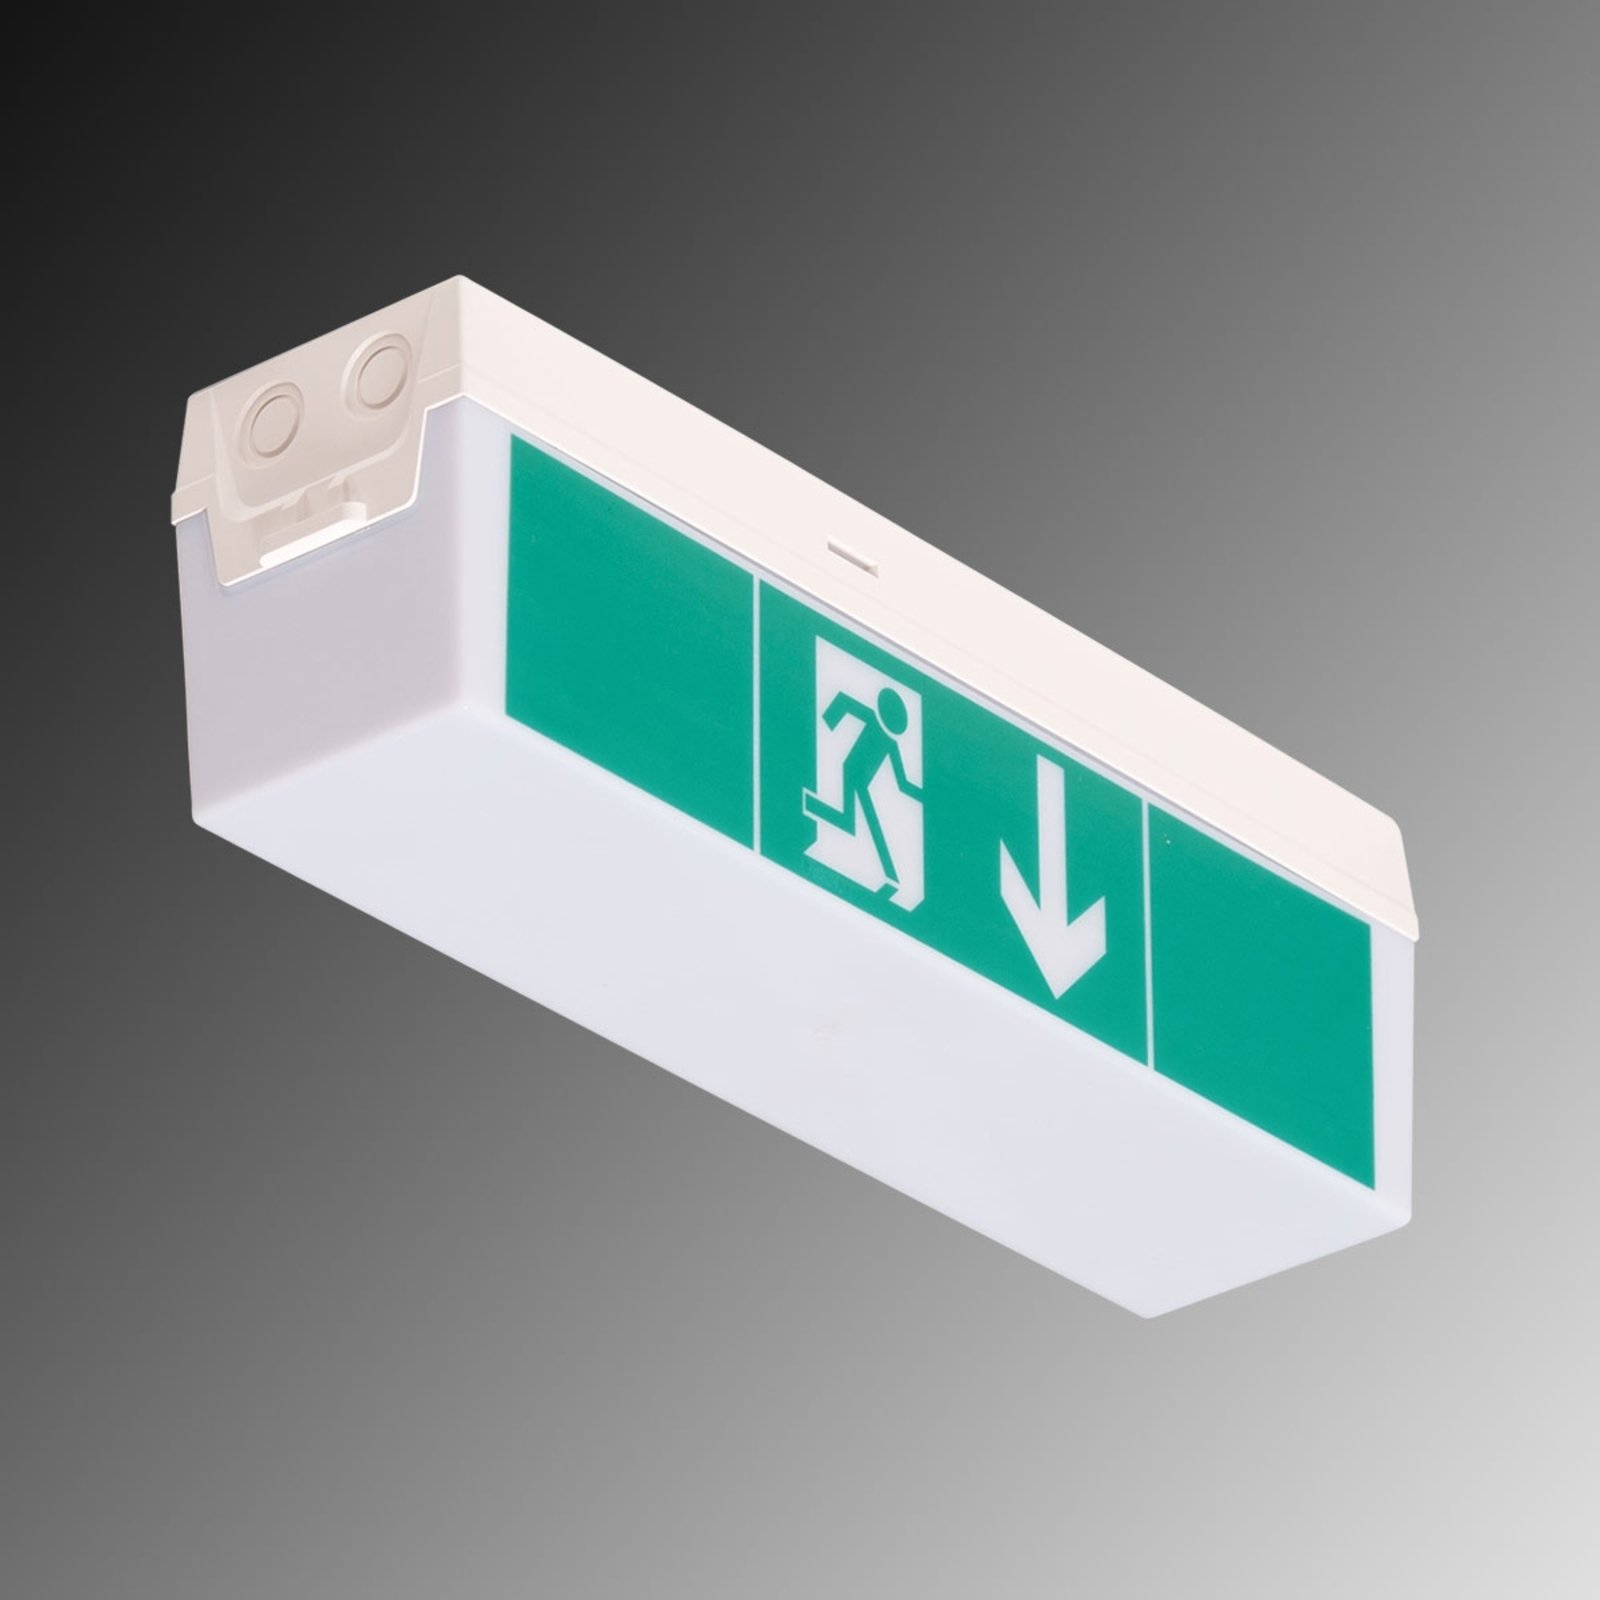 Luminaire pictogramme LED C-Lux Standard, 3 heures